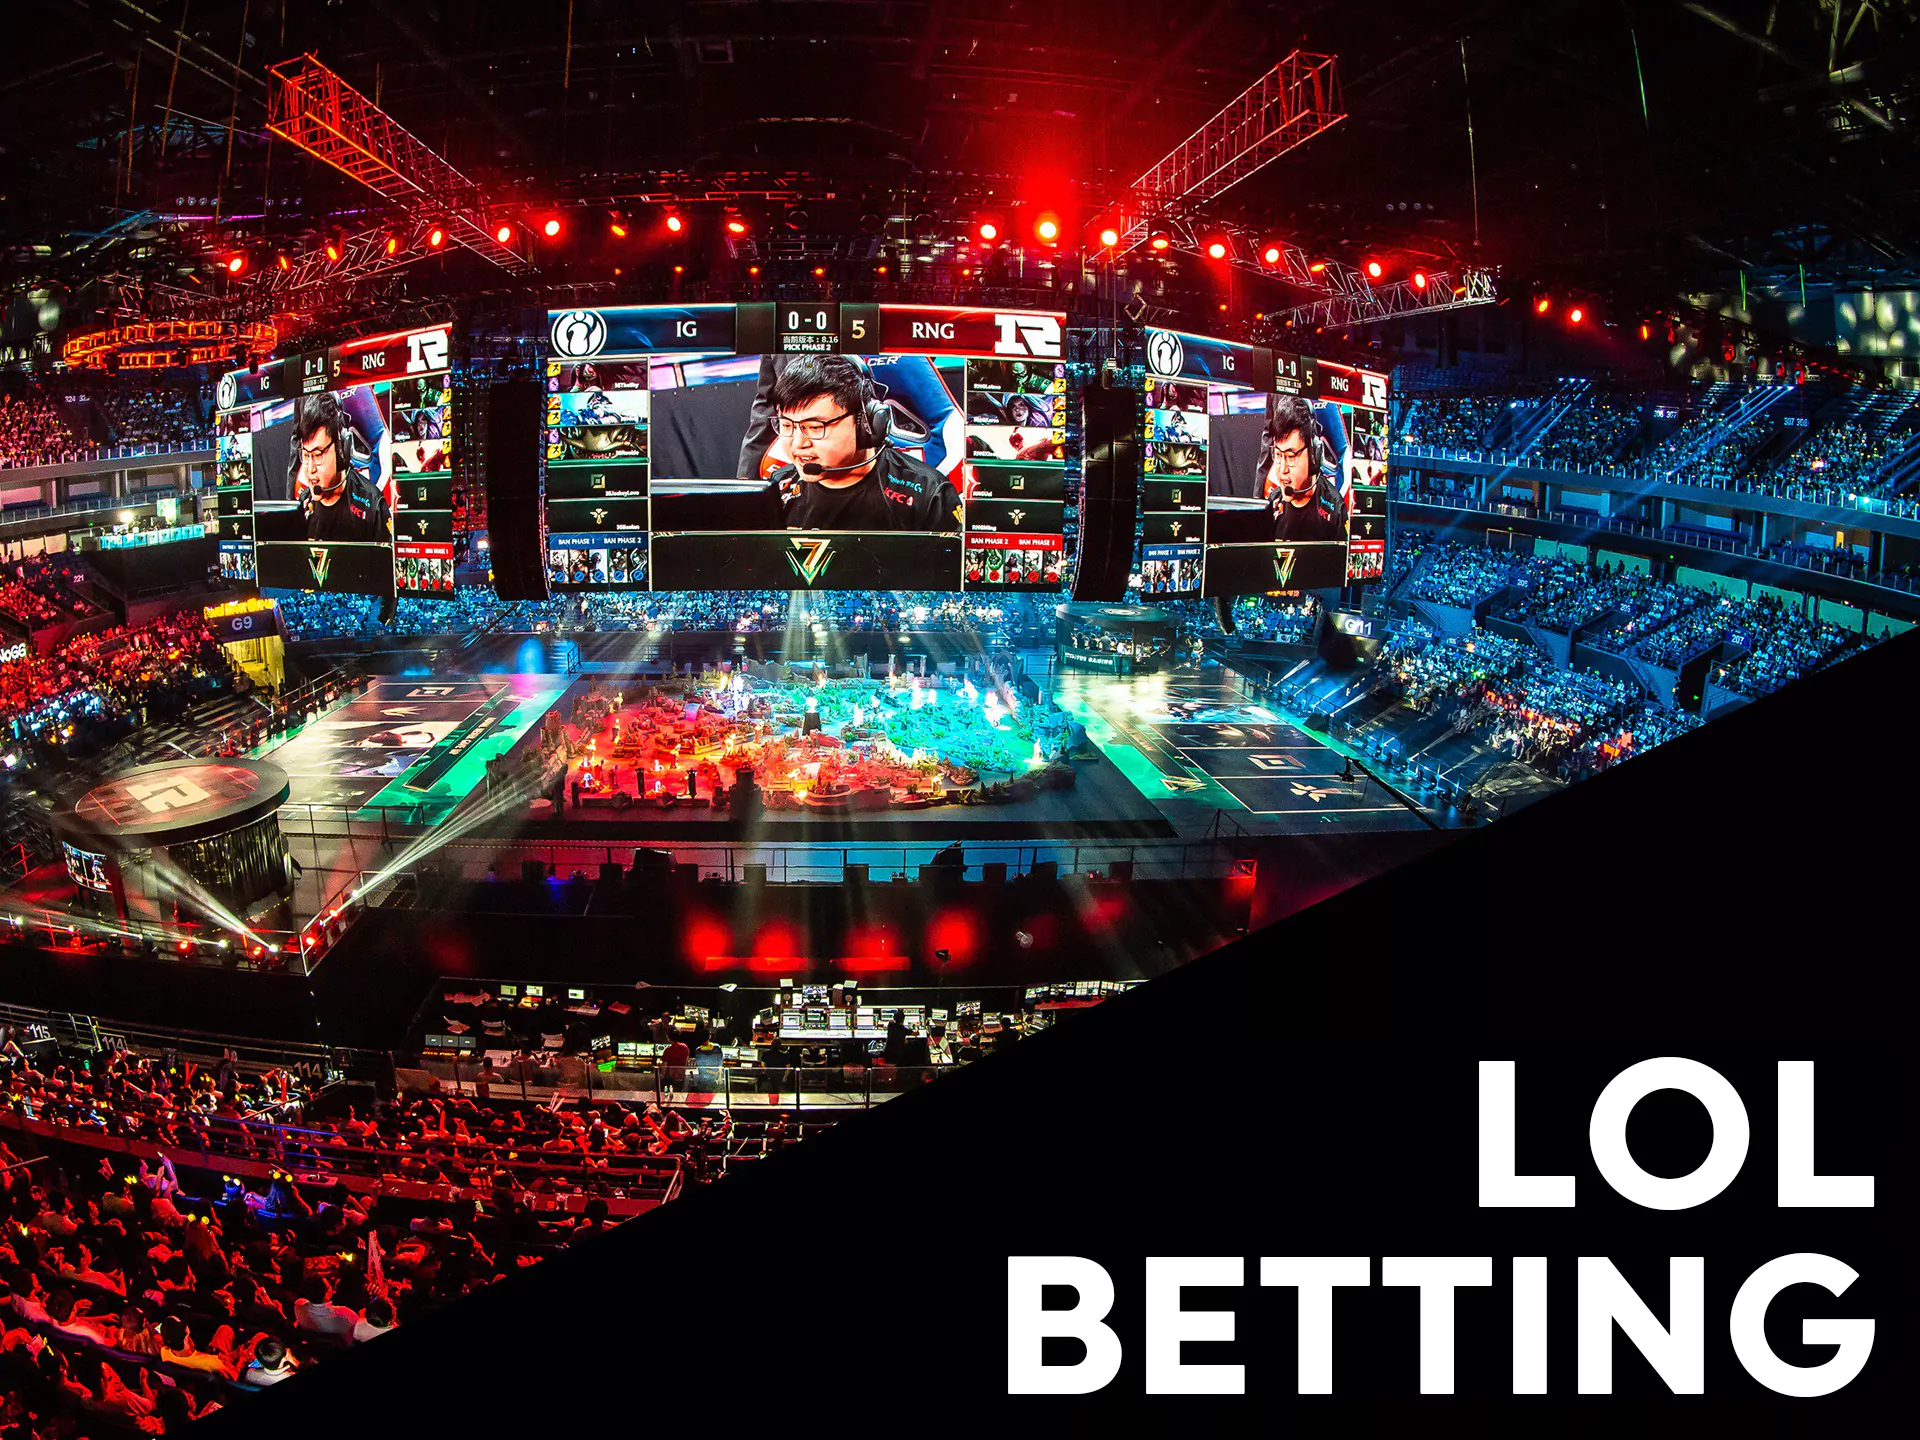 League of Legends betting at Fairplay.